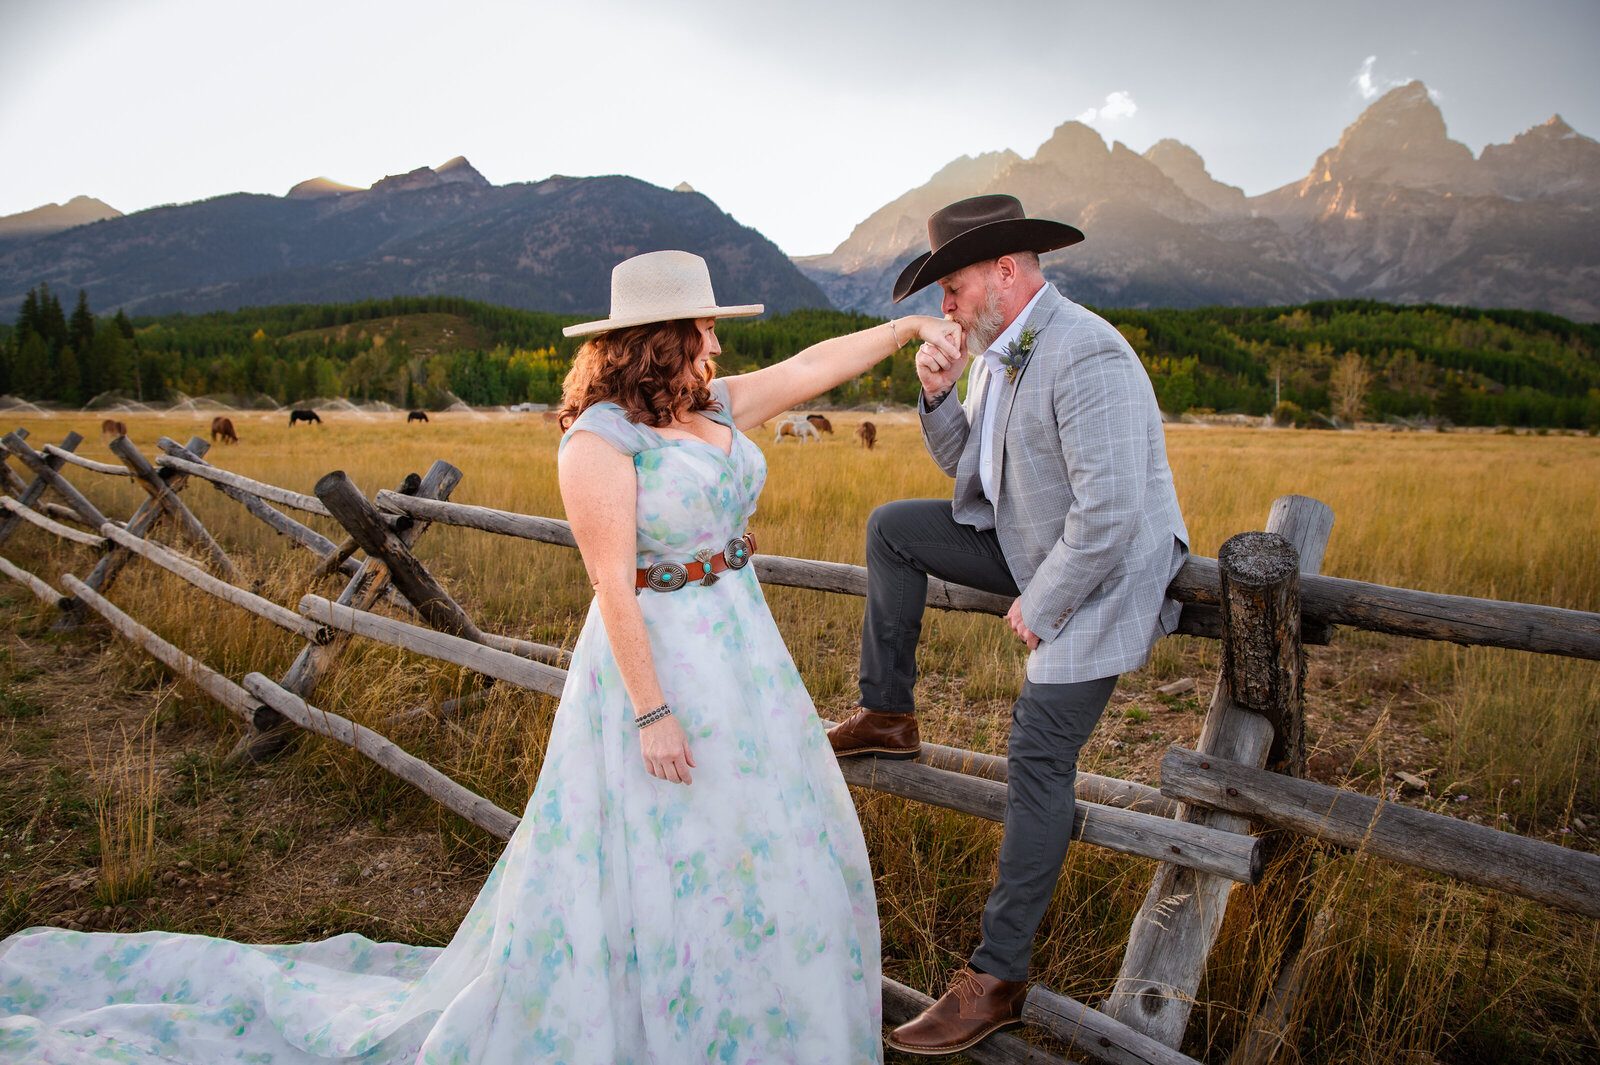 Groom sits on fence and kisses brides hand in Grand teton national park. Both are wearing cowboy hats and bride is in a blue and white dress.